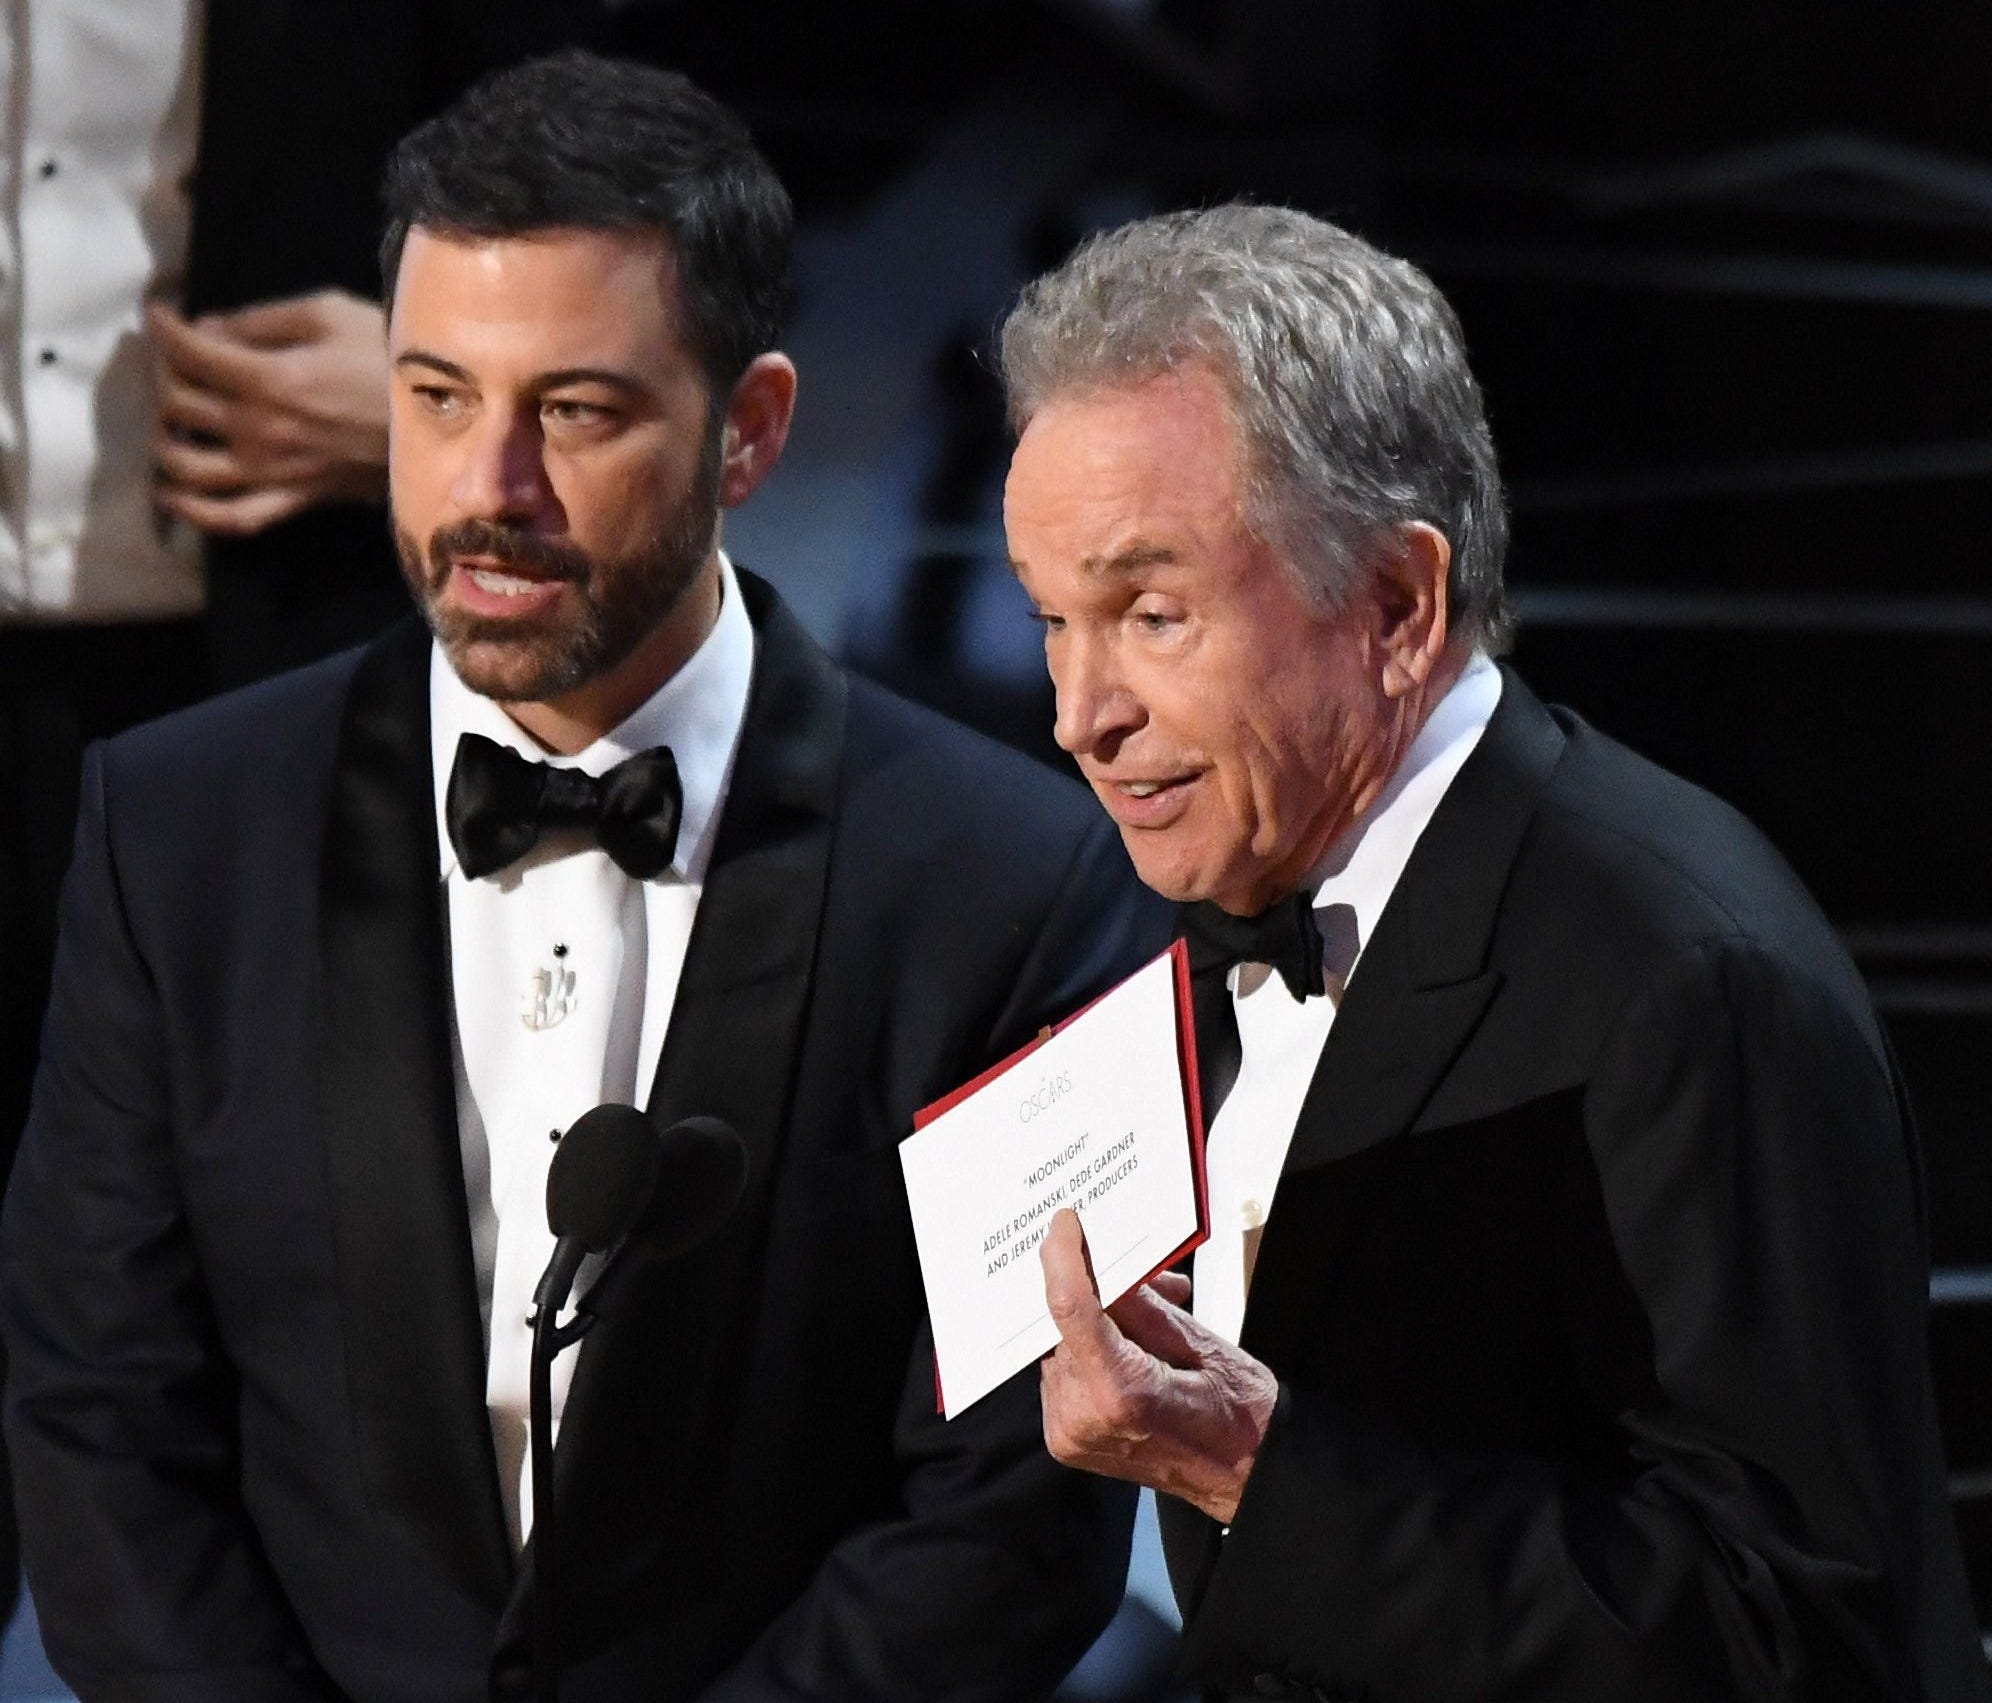 Warren Beatty explains to the audience how he had the wrong award card for best picture during the 89th Academy Awards at Dolby Theatre.